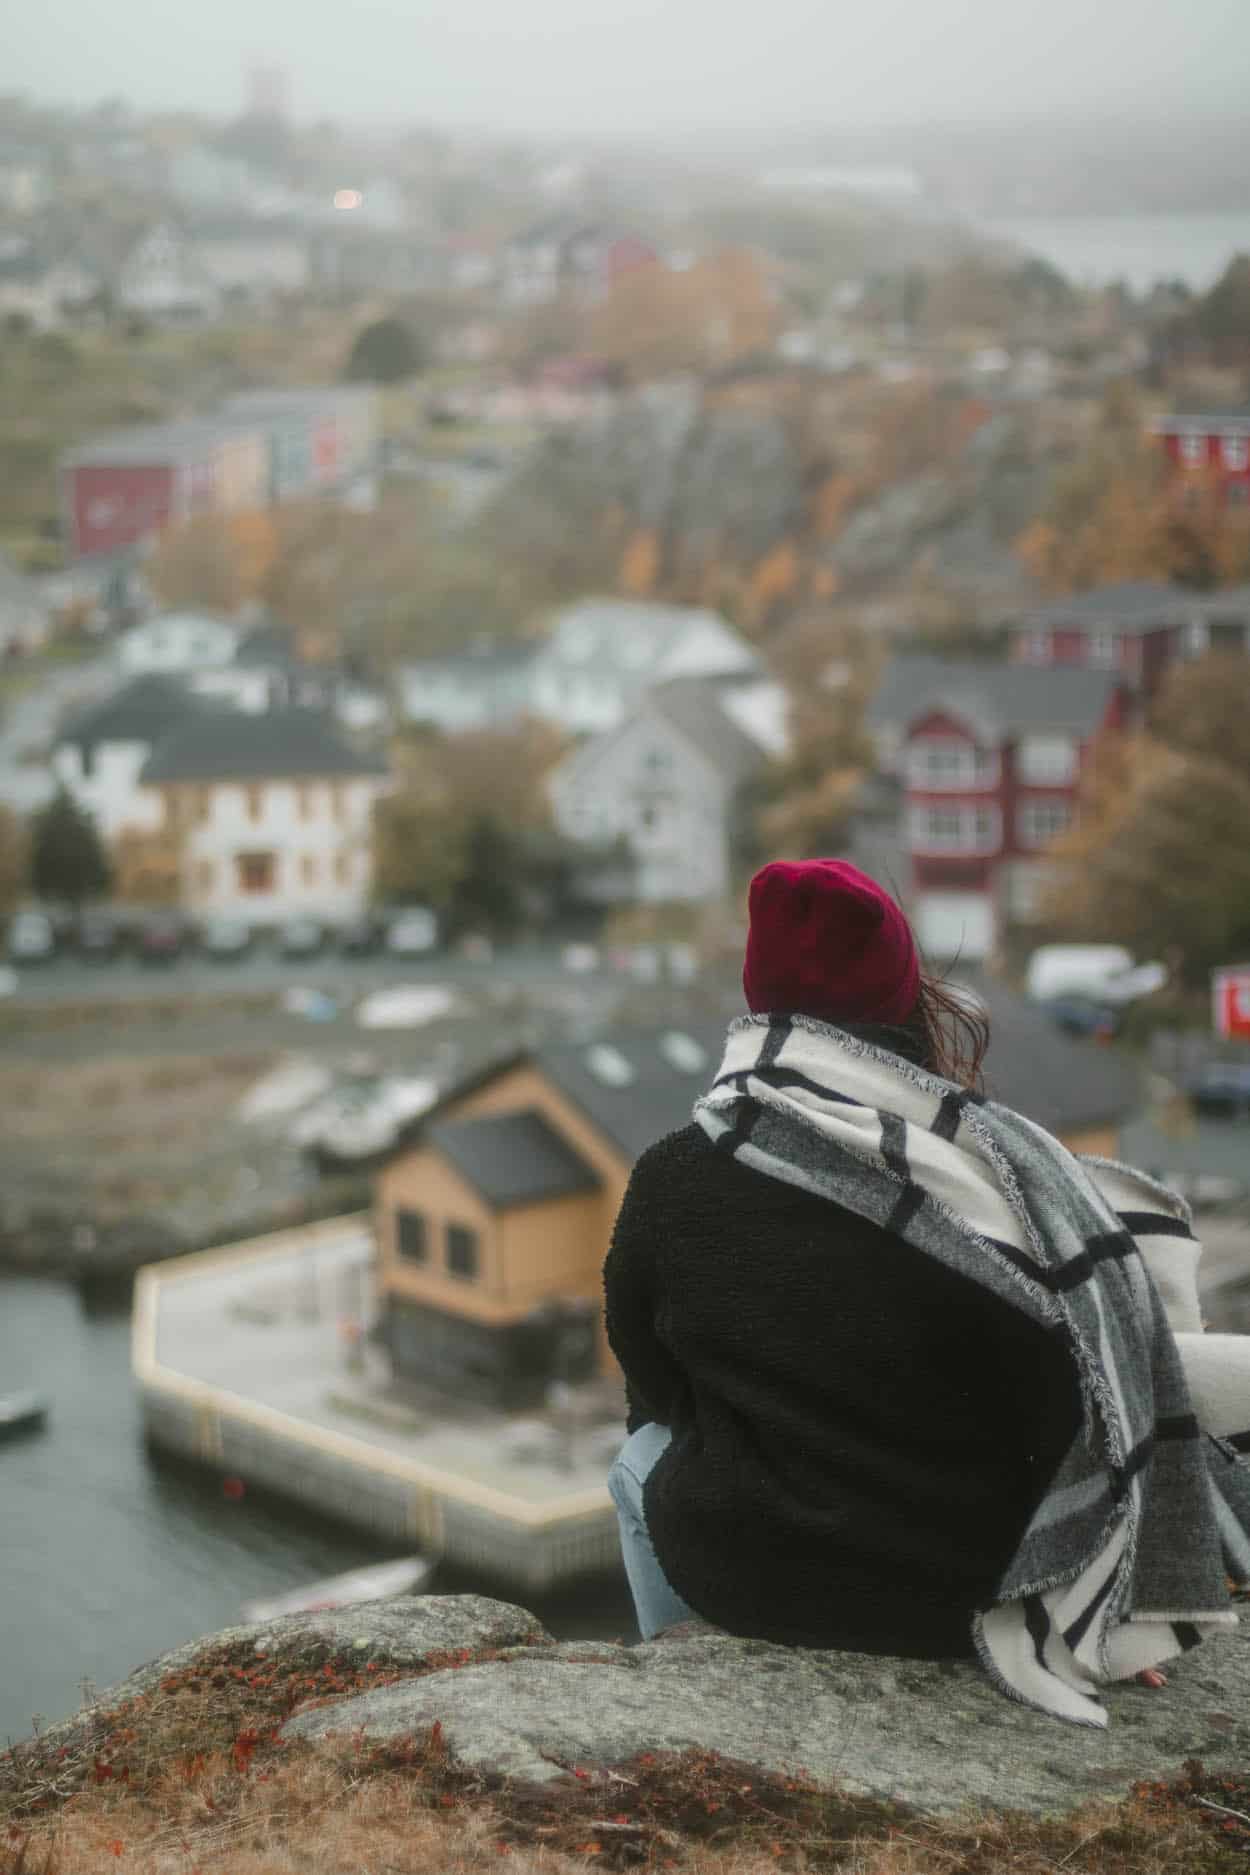 Quidi Vidi is one of the best stops to make during your 4 days in St. John's, Newfoundland